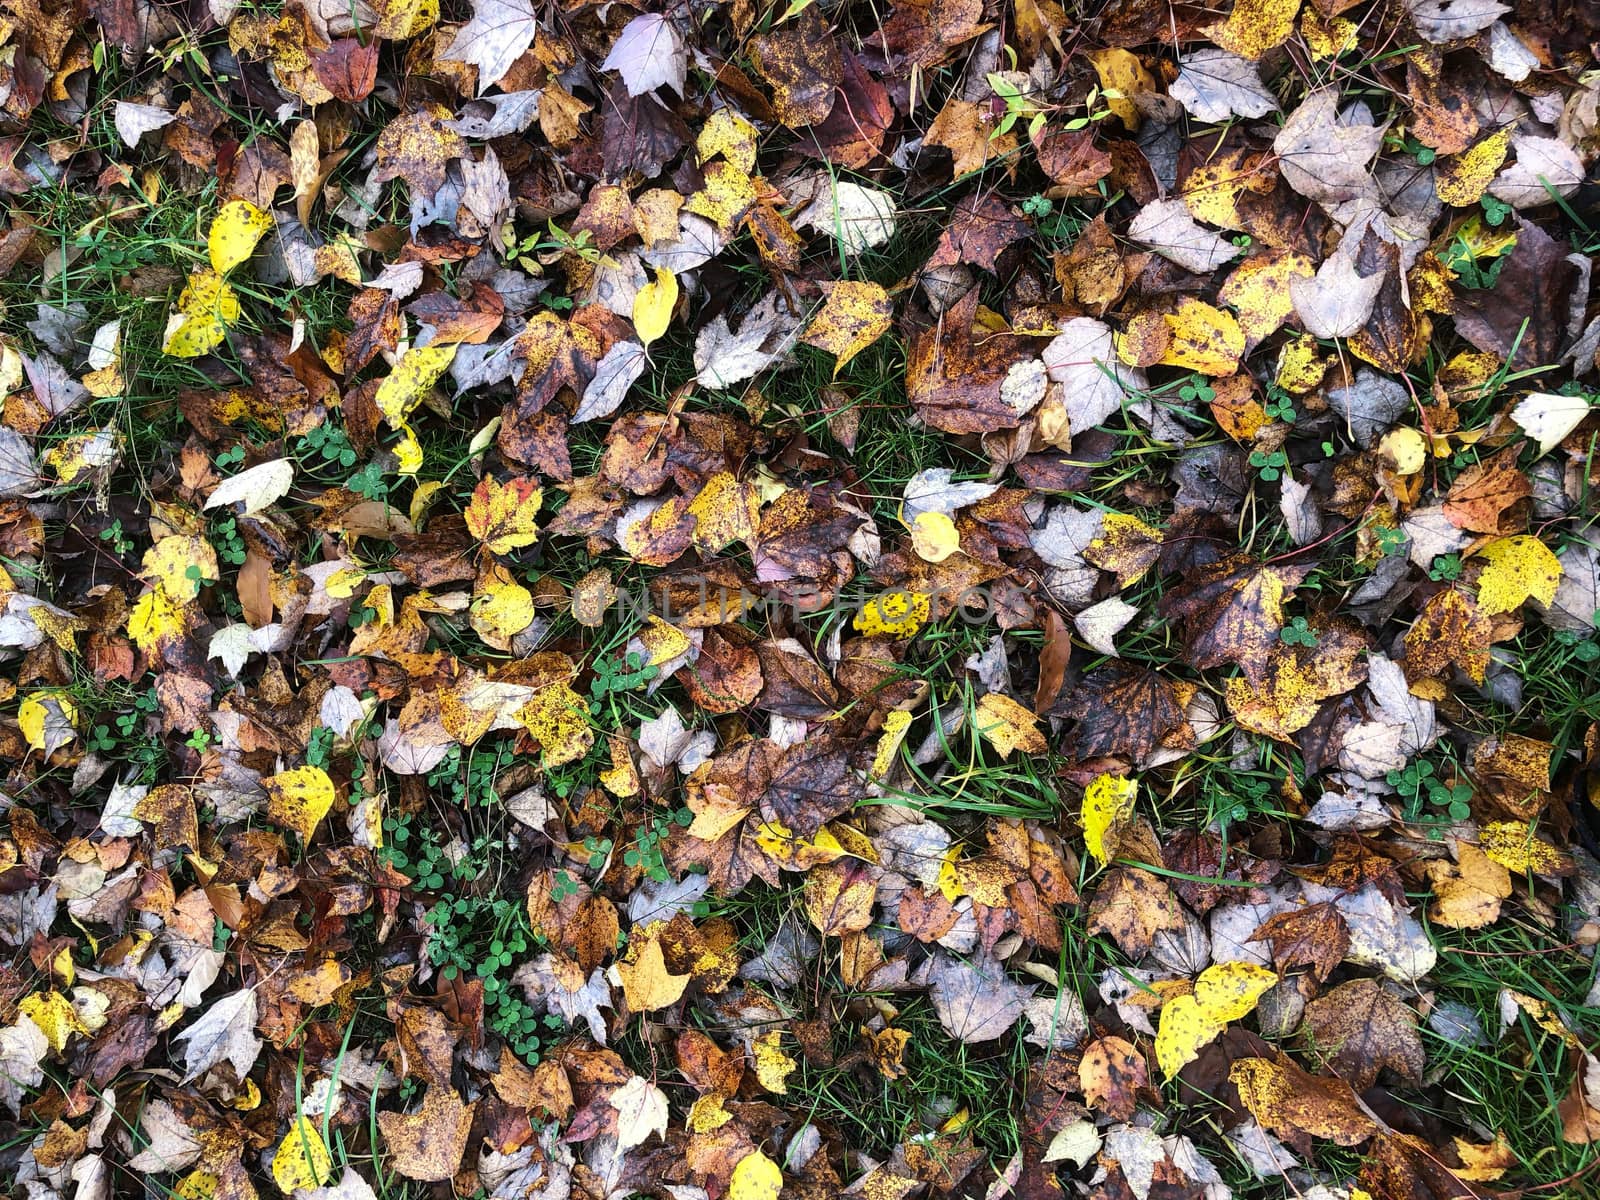 Forset floorbackground with autumn leaves and green grass. by marysalen